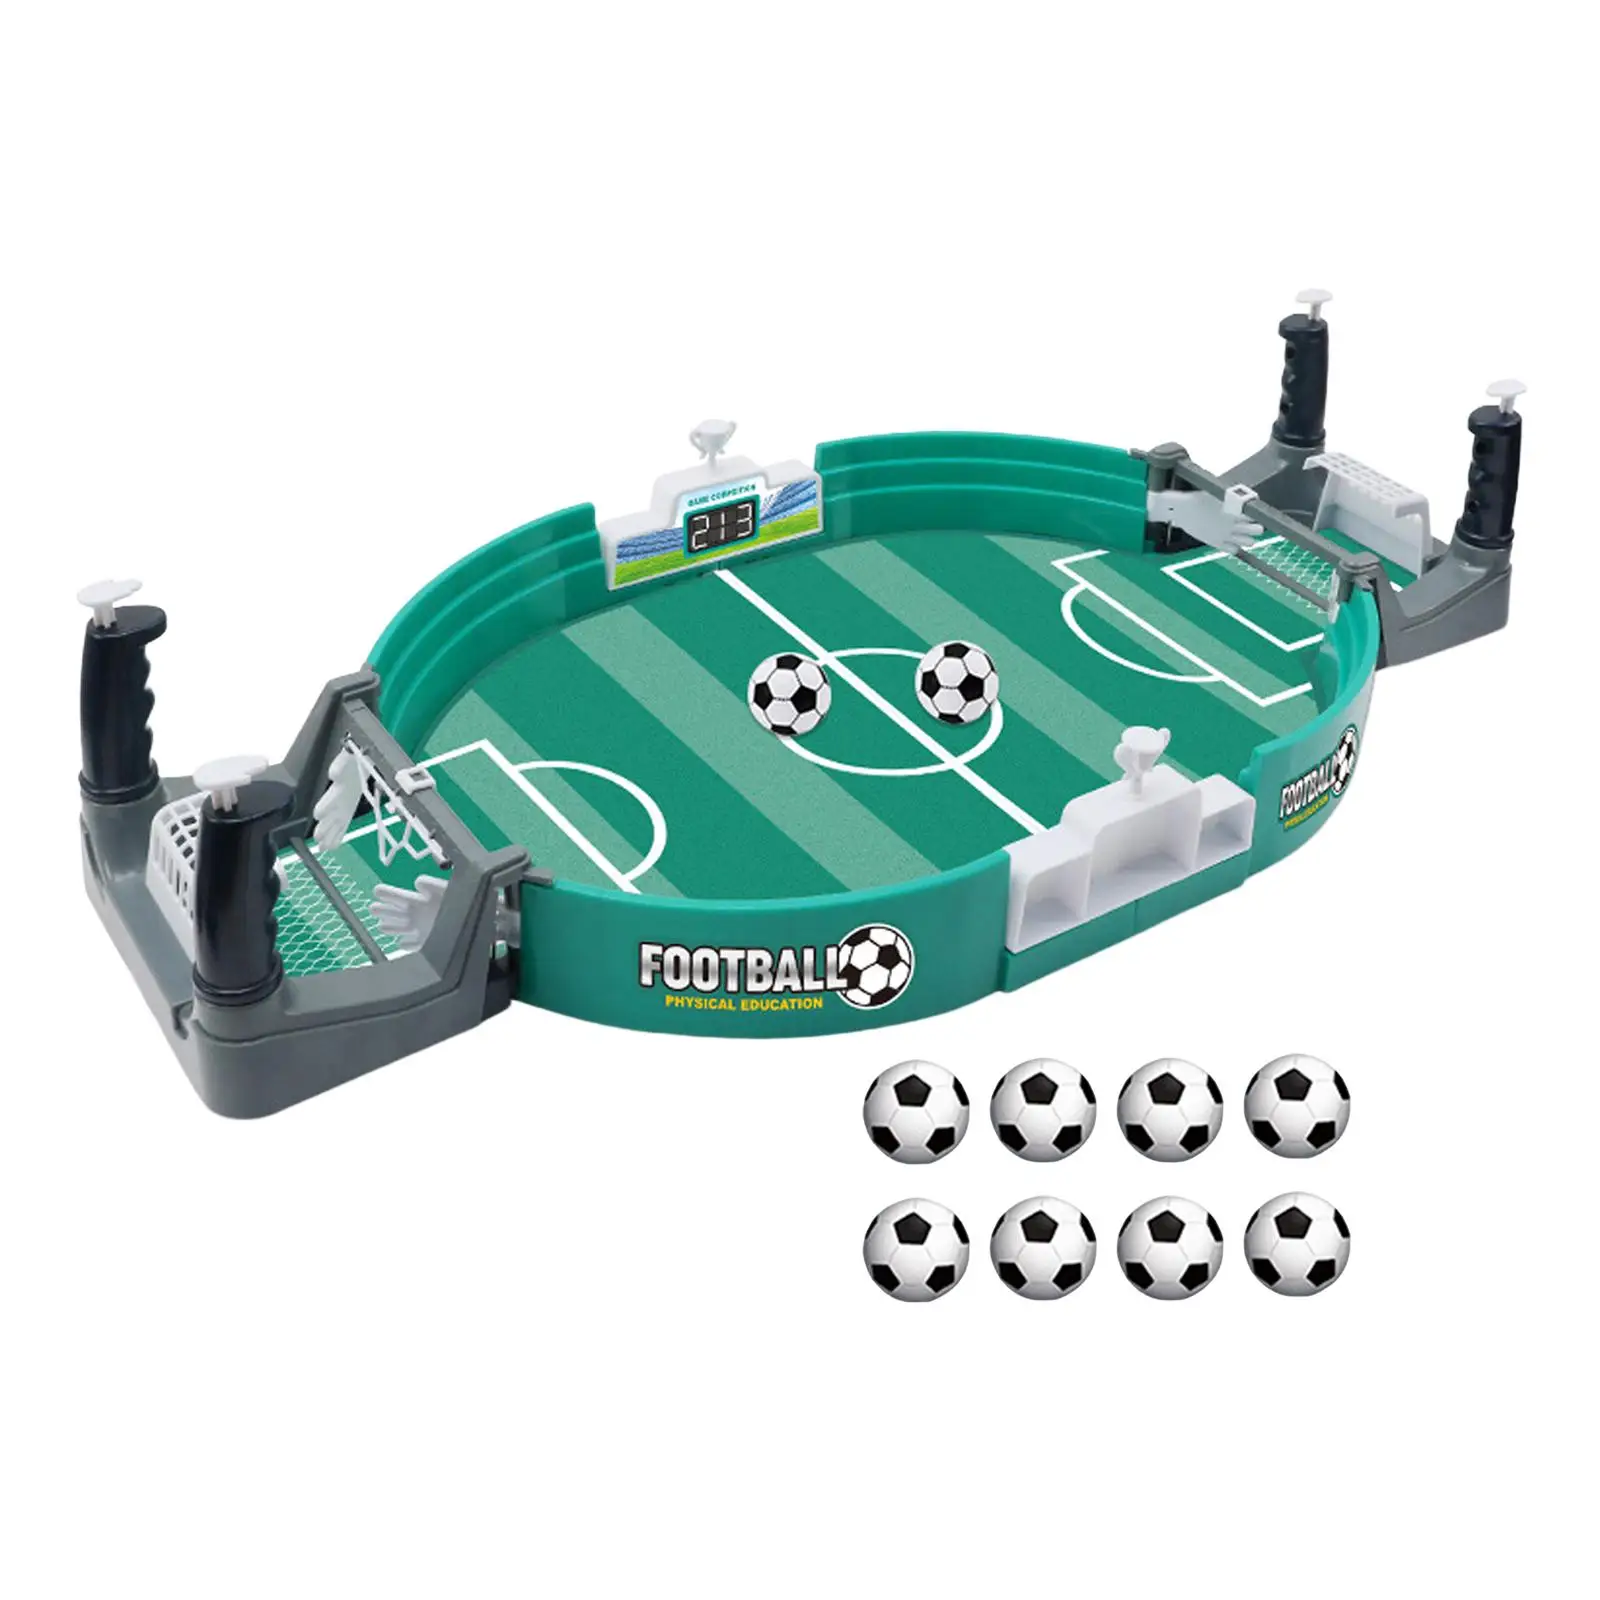 Table Soccer game Board Game Mini Tabletop Football for Entertainment